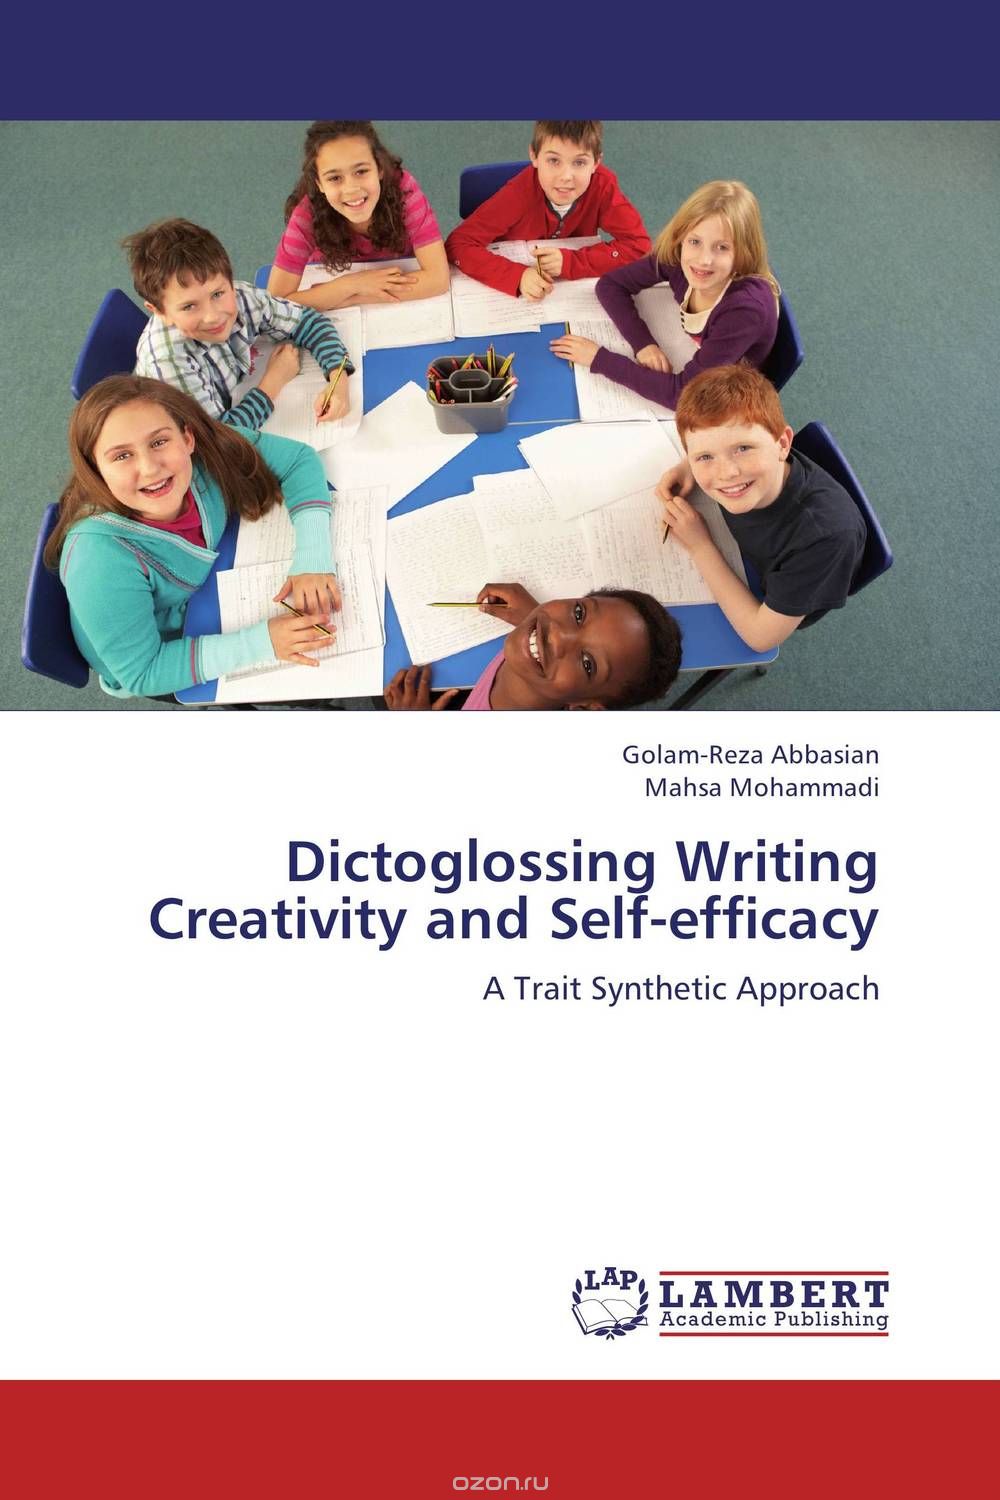 Dictoglossing Writing Creativity and Self-efficacy